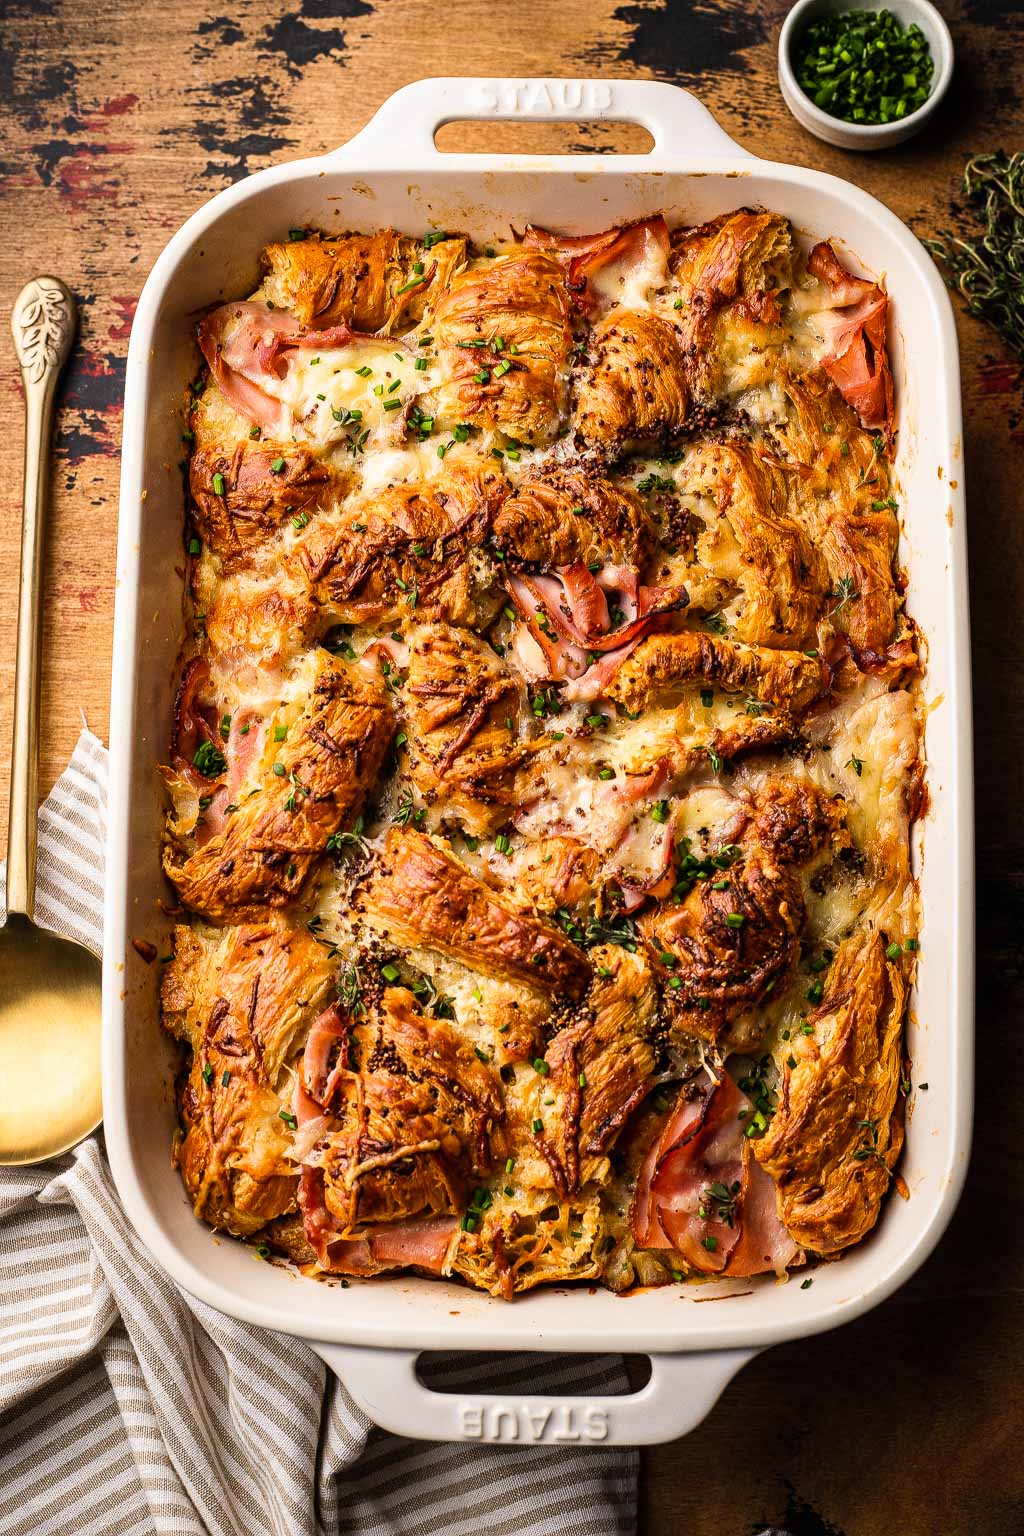 Ham and cheese croissant bake